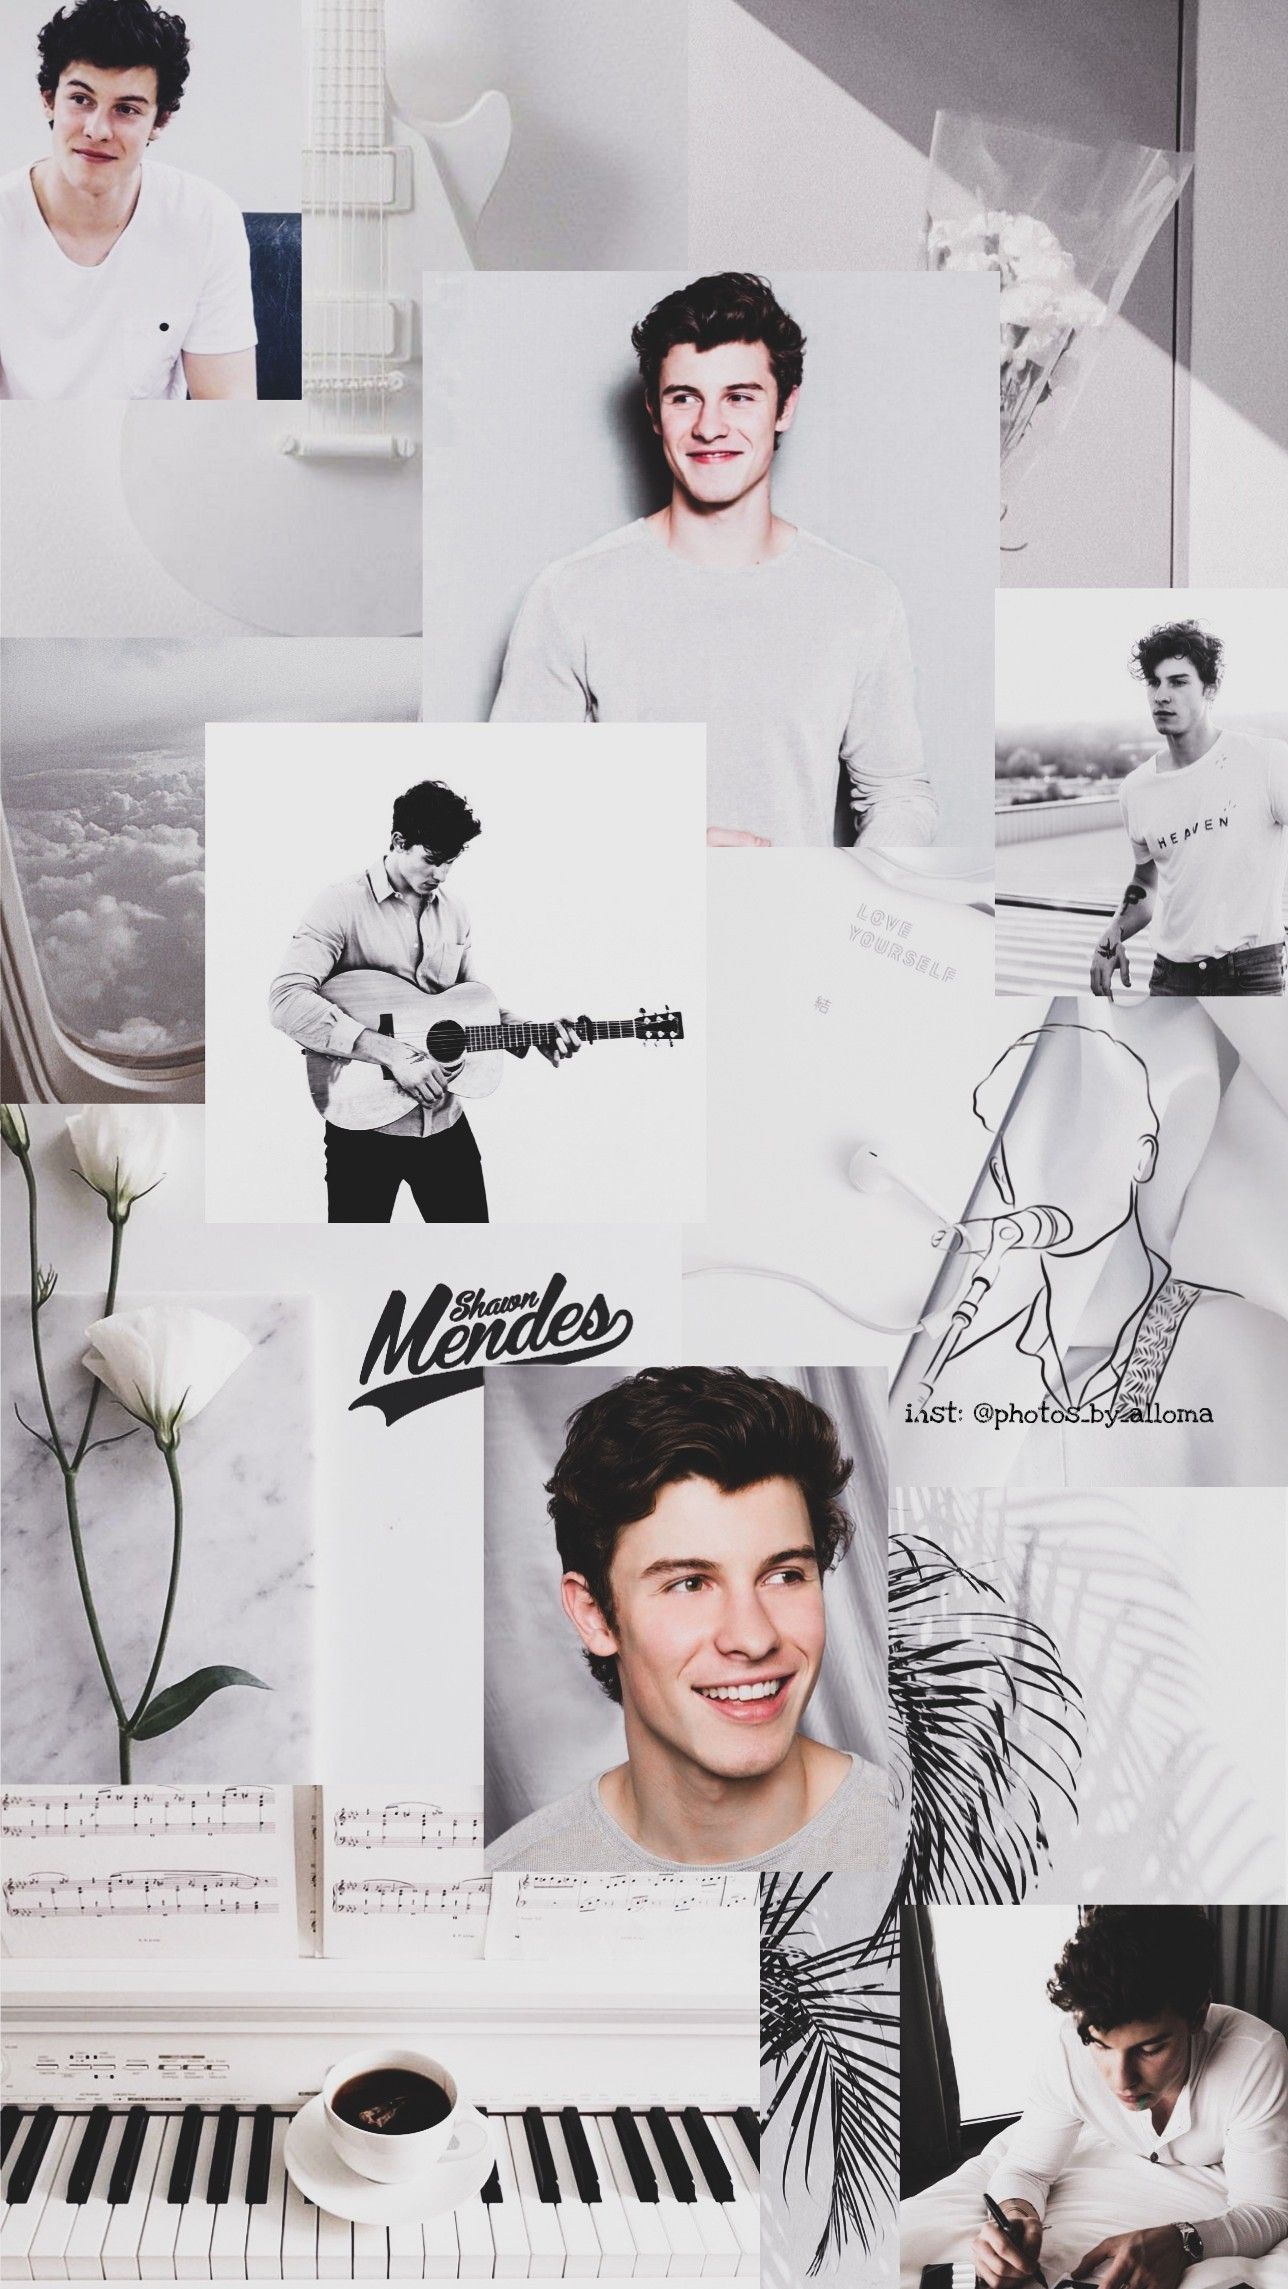 Shawn mendes aesthetic wallpaper, shawn mendes, aesthetic, music, singer, musician, monochrome, black and white, photo, photos - Shawn Mendes